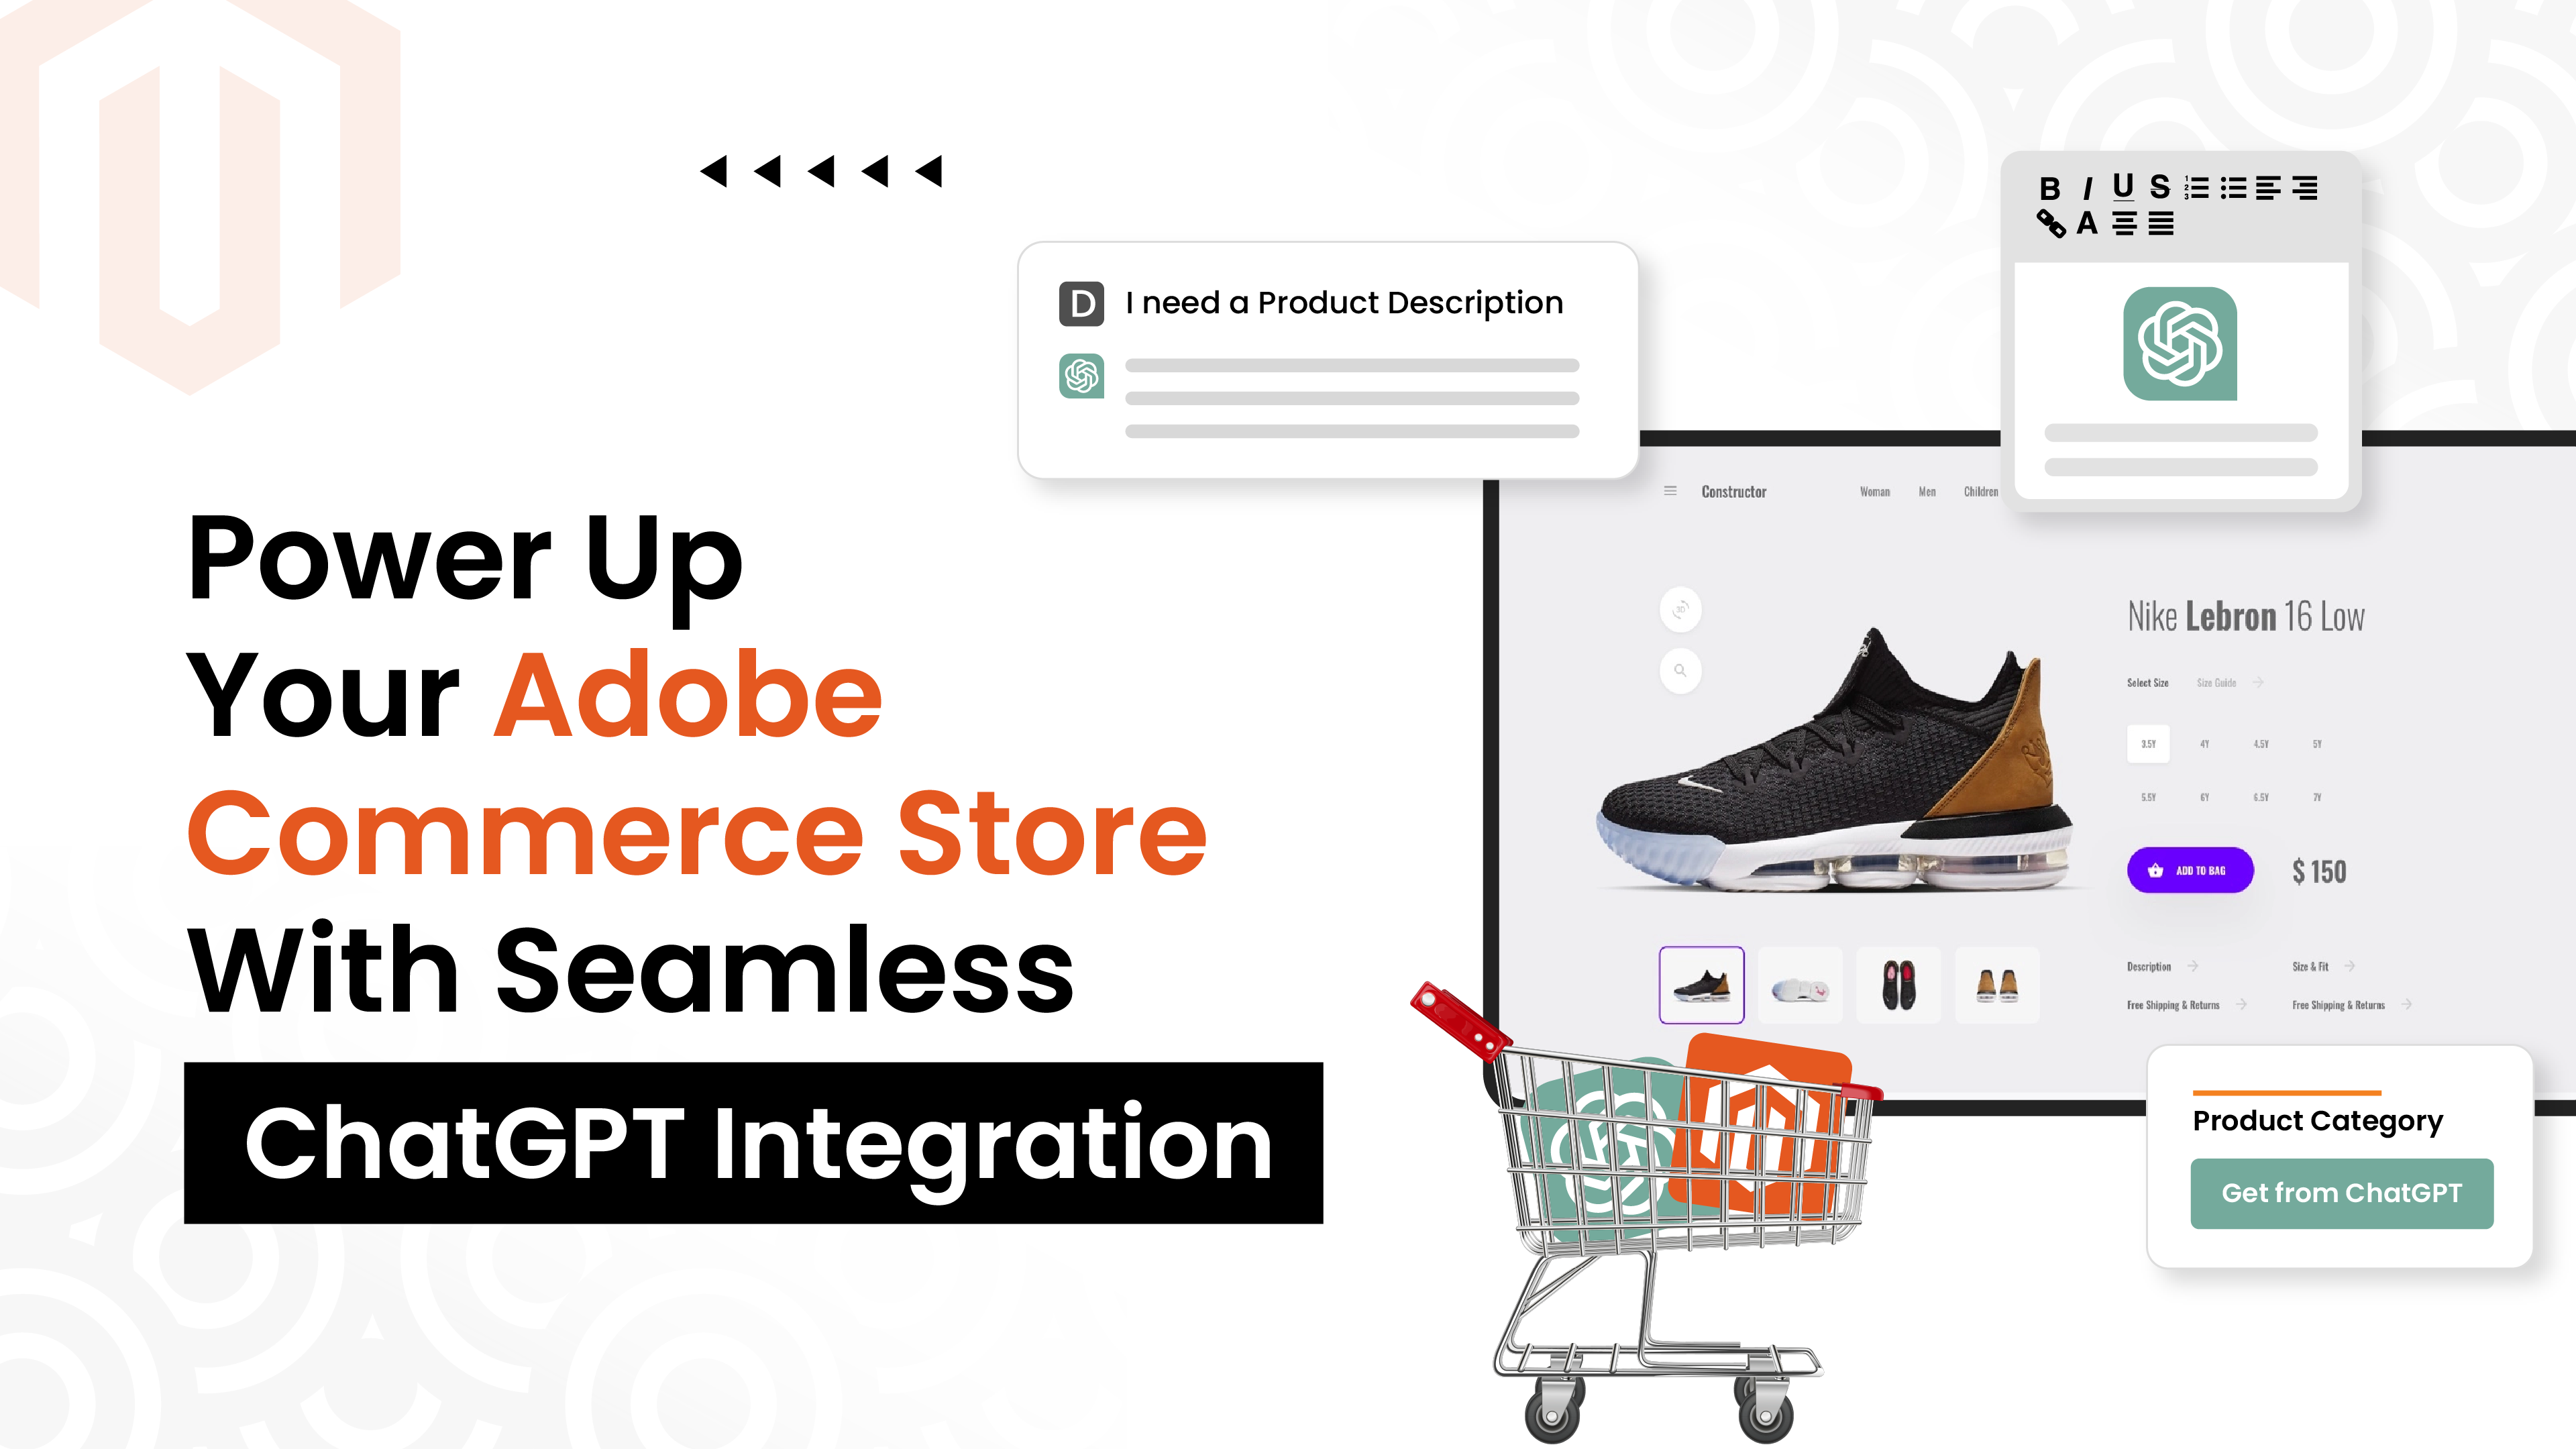 Power Up Your Adobe eCommerce Store with Seamless ChatGPT Integration